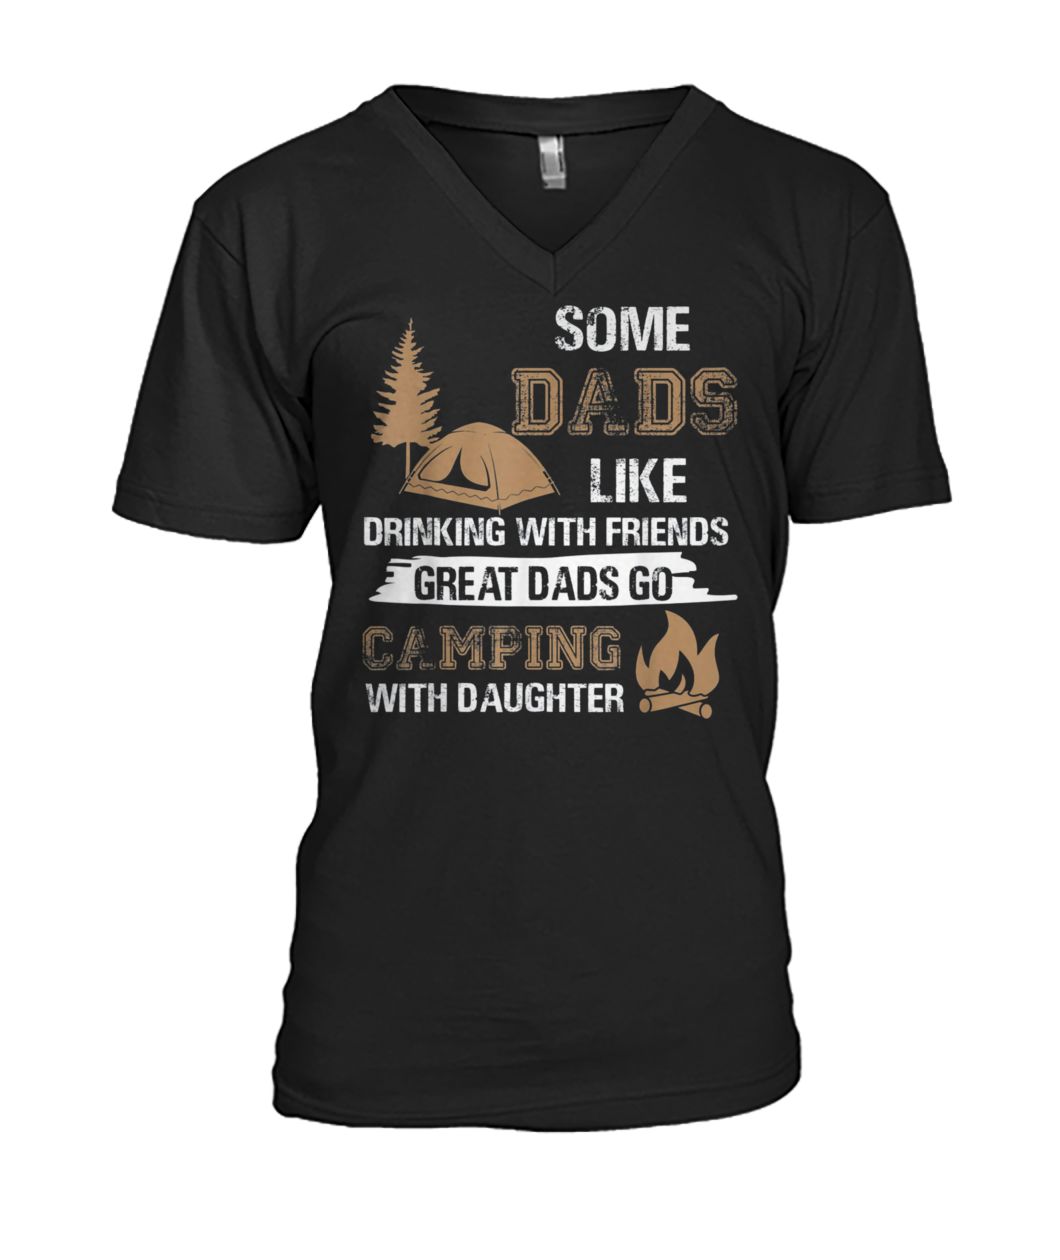 Some dads like drinking with friends great dads go camping with daughter mens v-neck